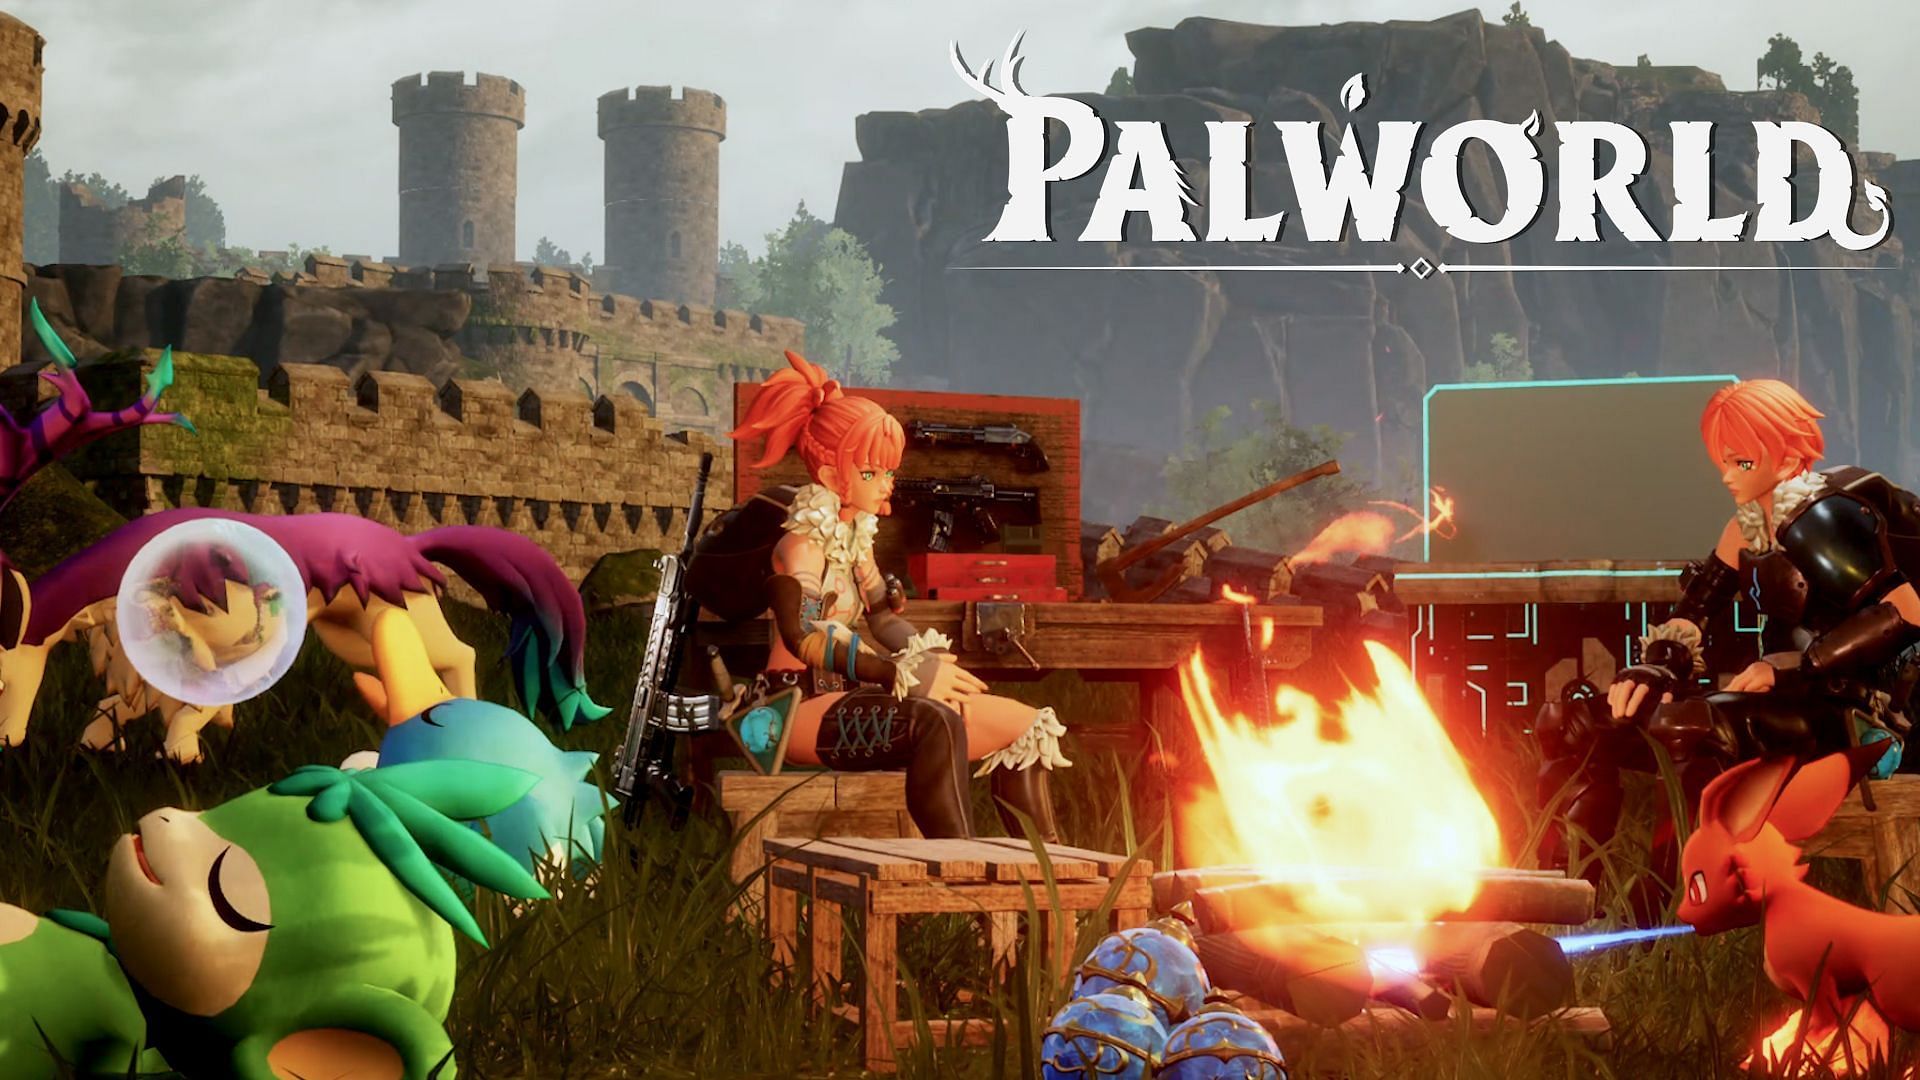 Official imagery for Palworld (Image via Pocket Pair, Inc.)